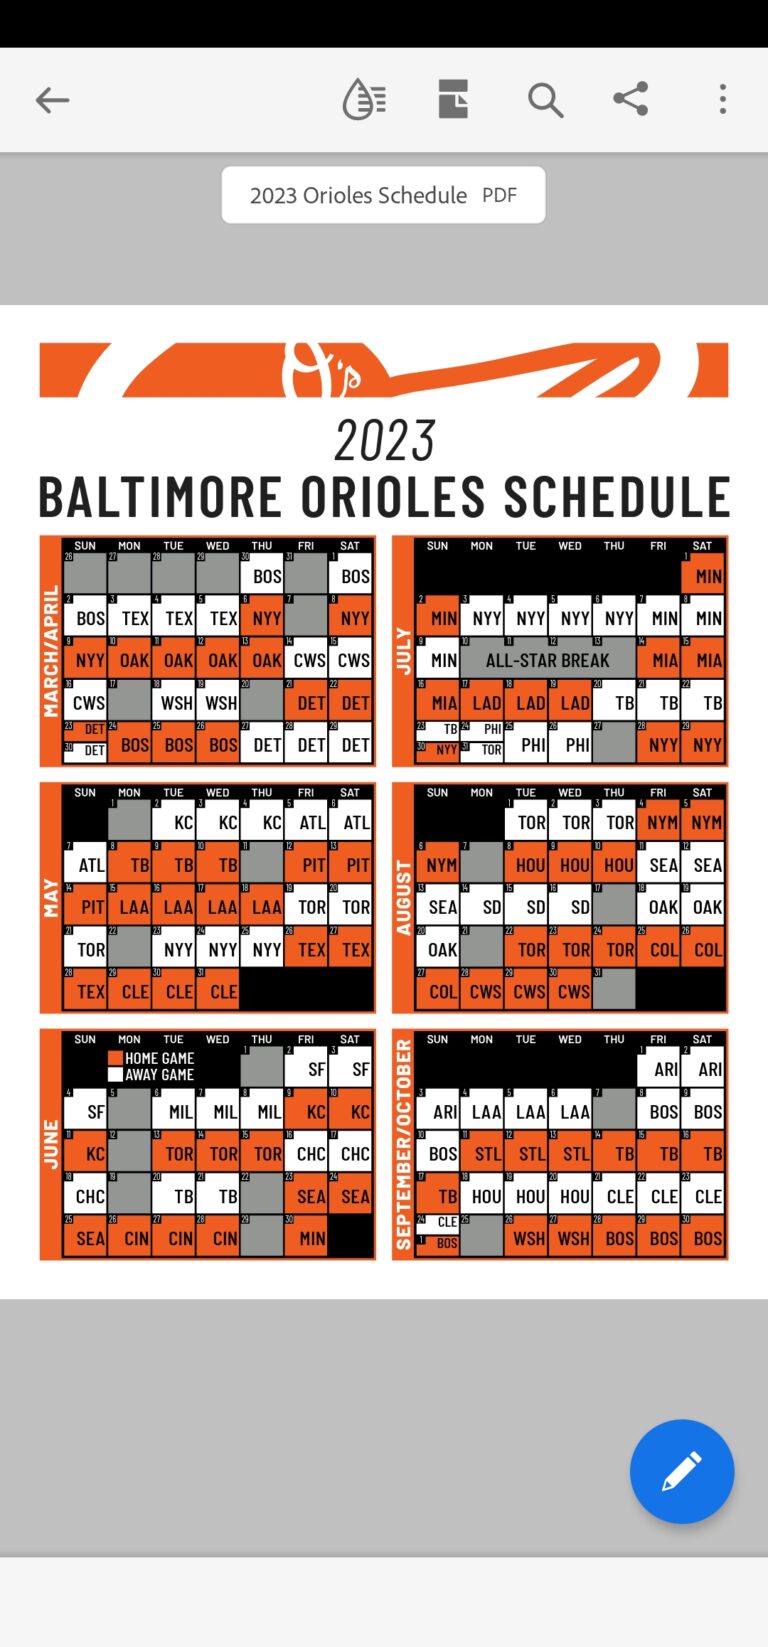 Orioles release their 2023 MLB schedule